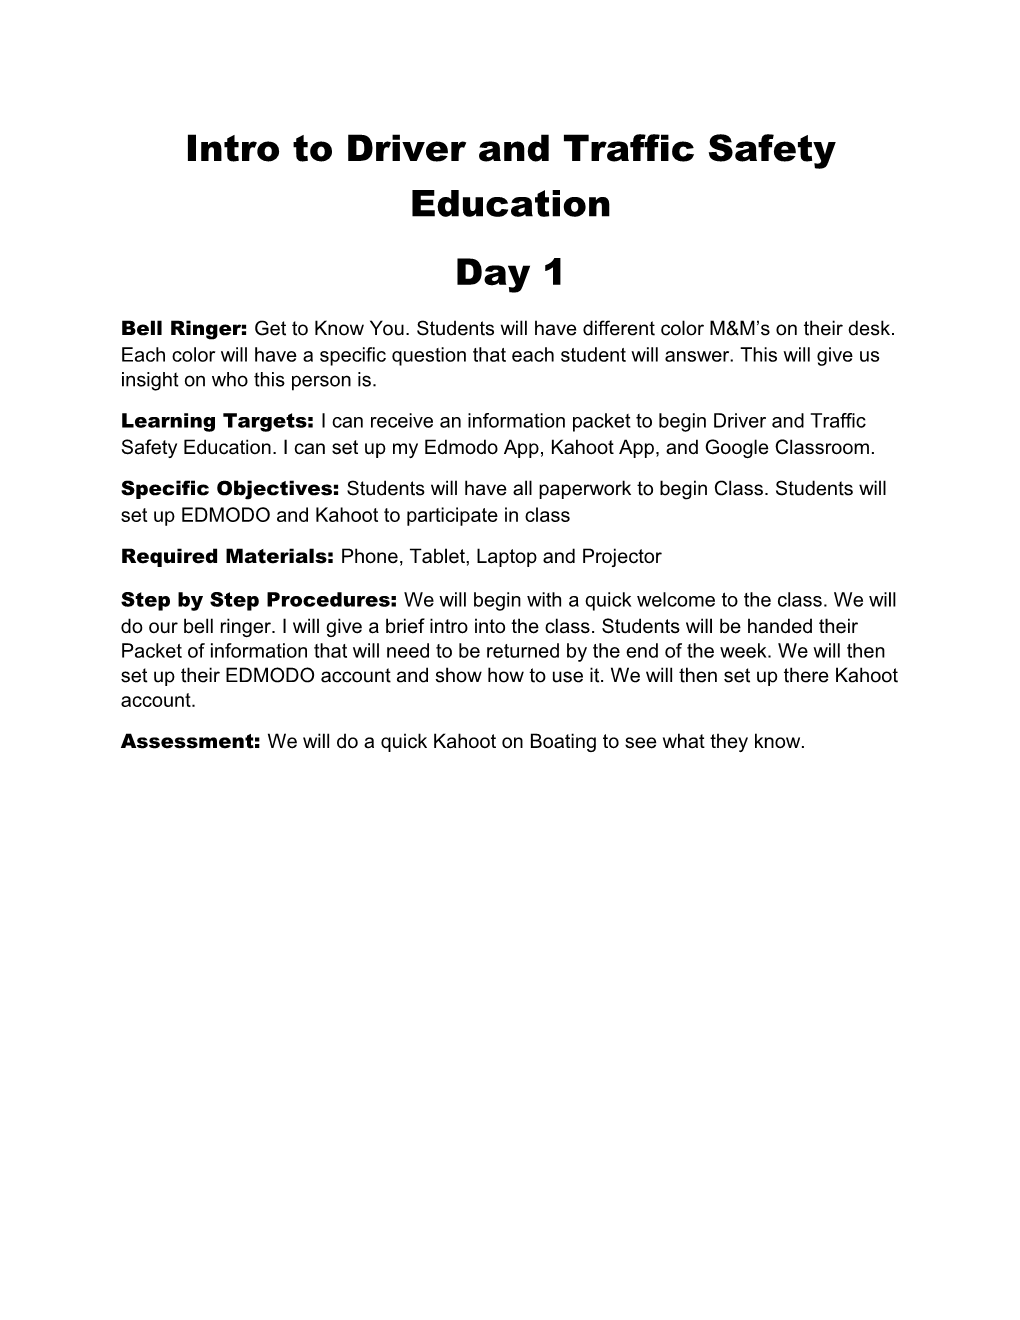 Intro to Driver and Traffic Safety Education